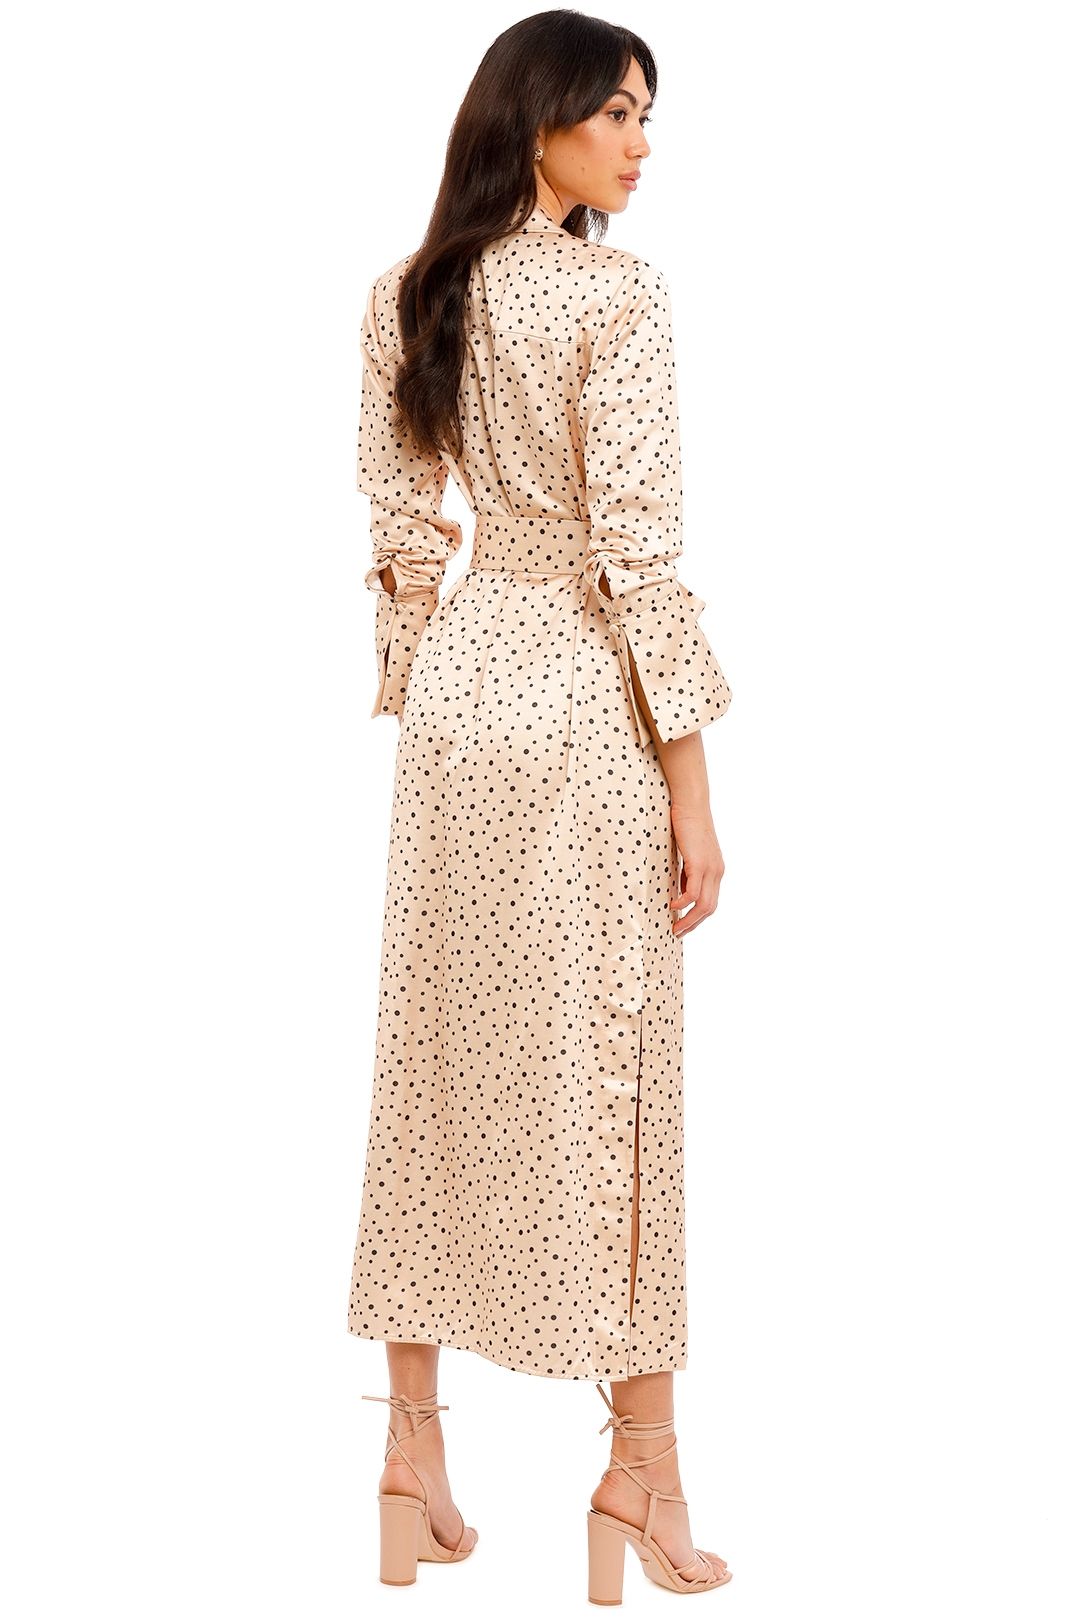 Amara Dress in Cream Black Polka Significant Other collared